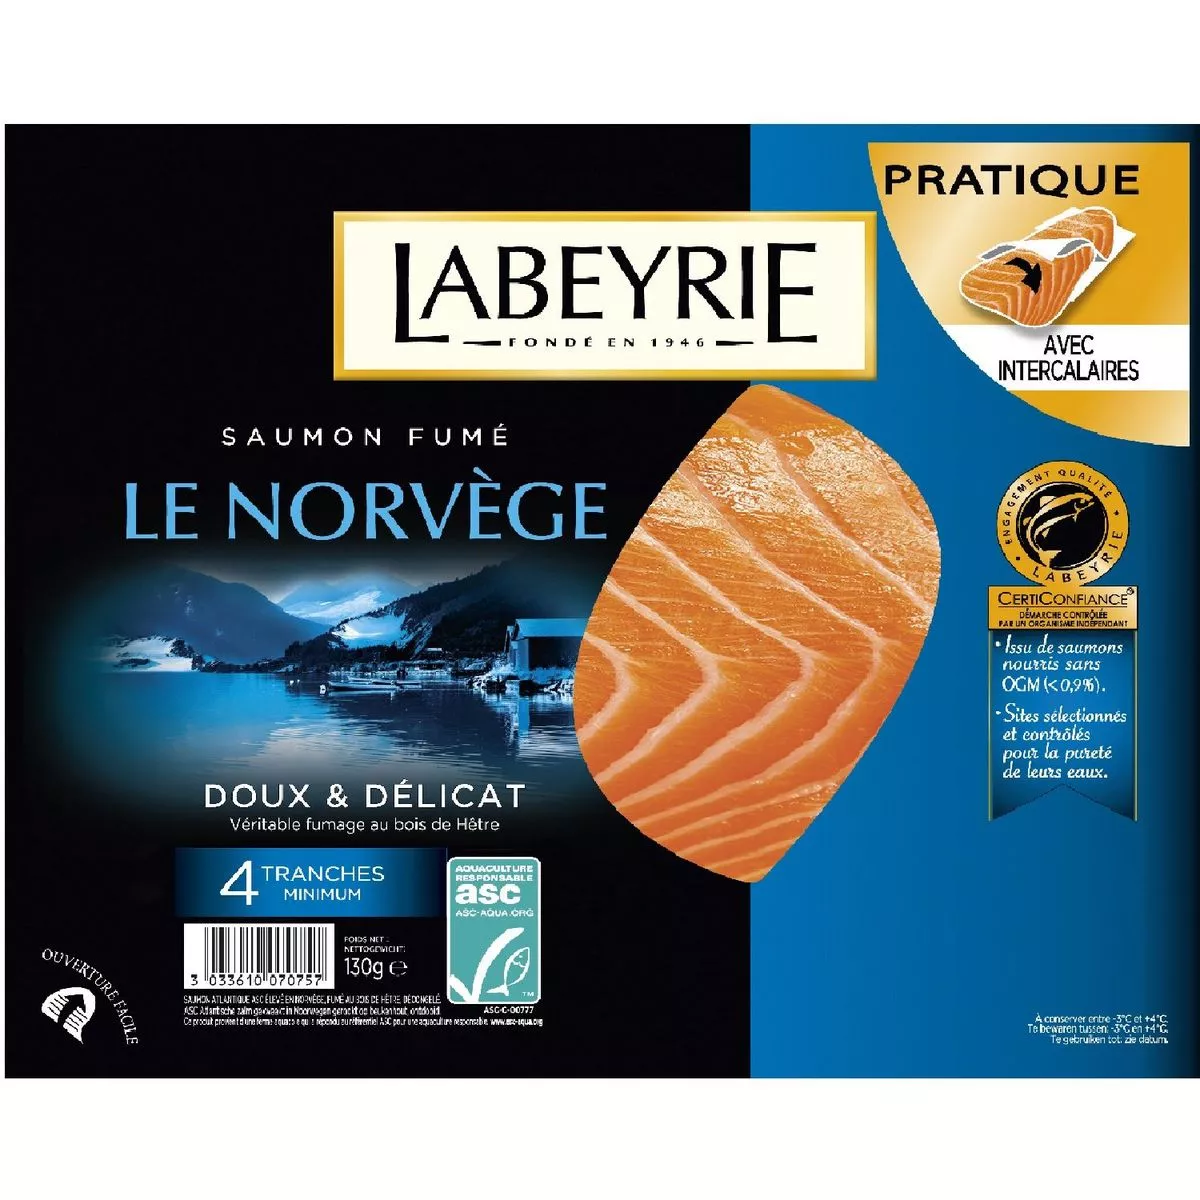 Labeyrie Smoked Salmon from Norway 100g